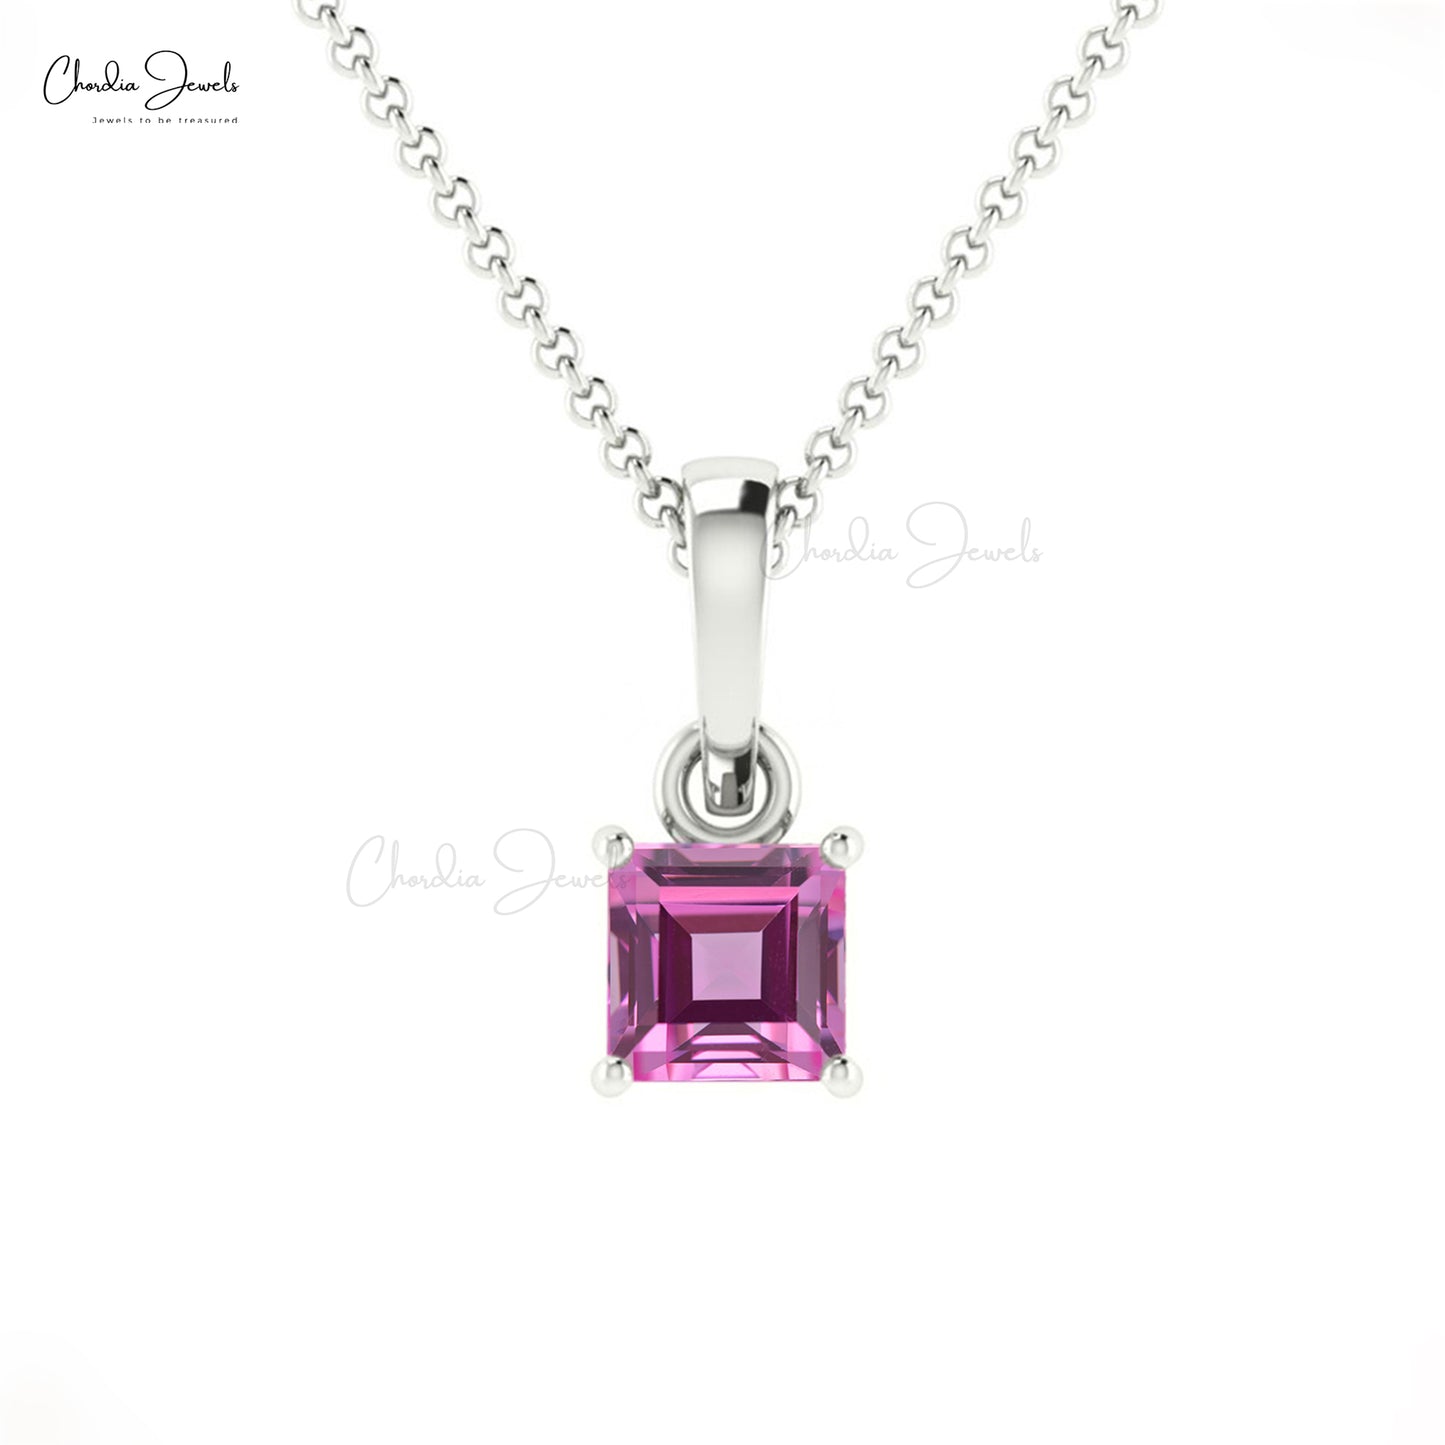 Genuine Pink Sapphire Solitaire Pendant 4mm Square Cut Gemstone Handmade Pendant Necklace 14k Real Gold Affordable Jewelry